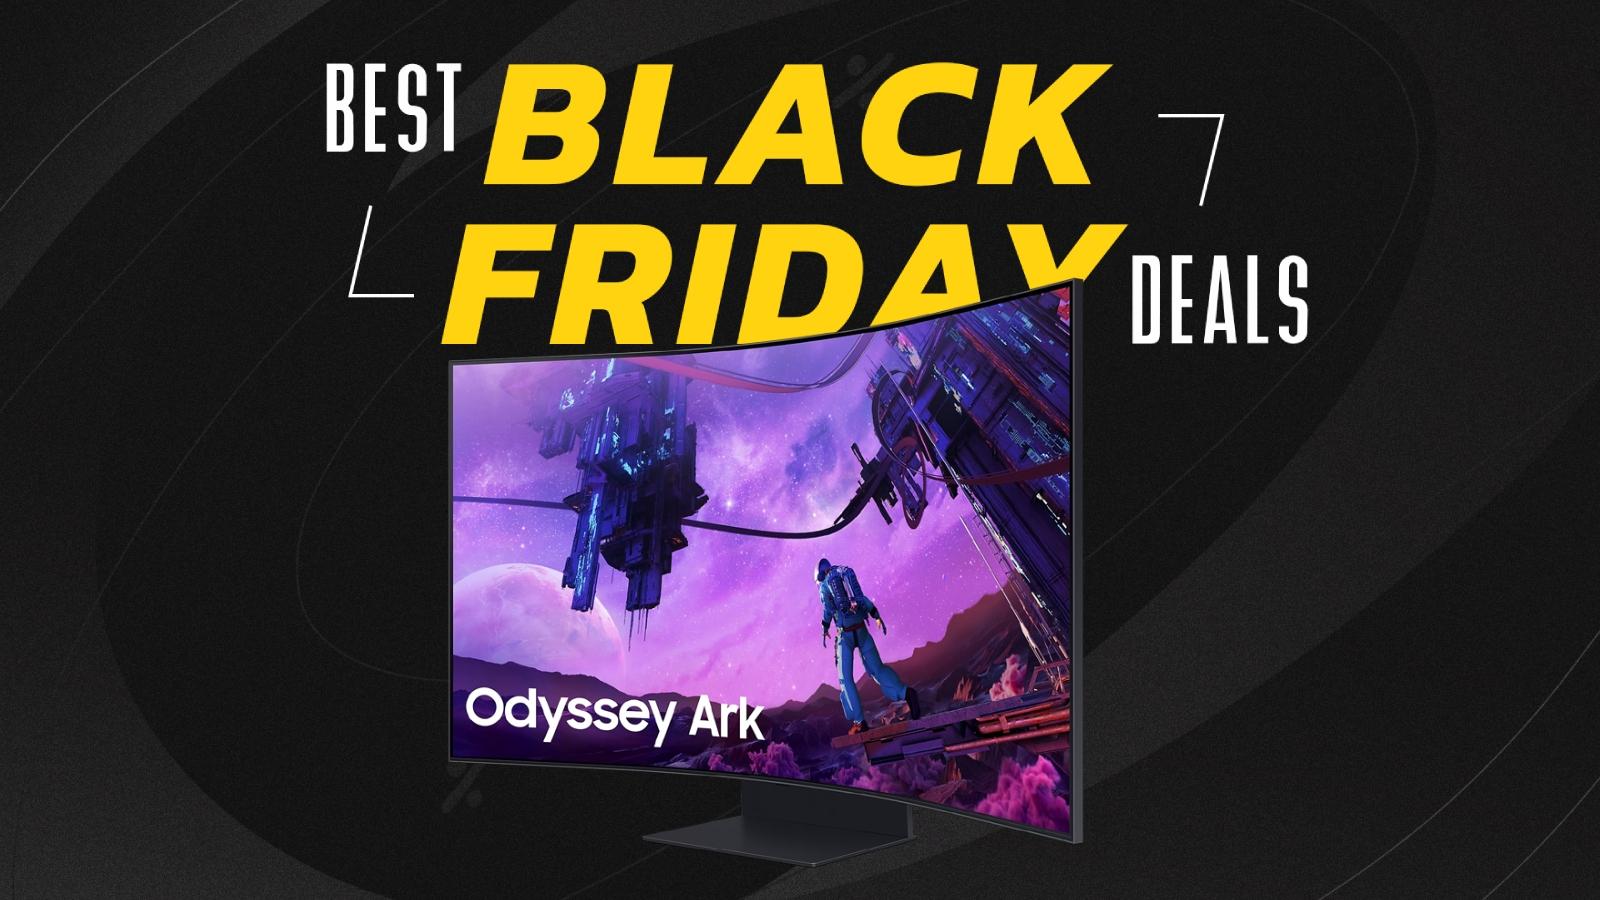 Dazzling LG ultrawide 160Hz gaming monitor gets 27% discount at